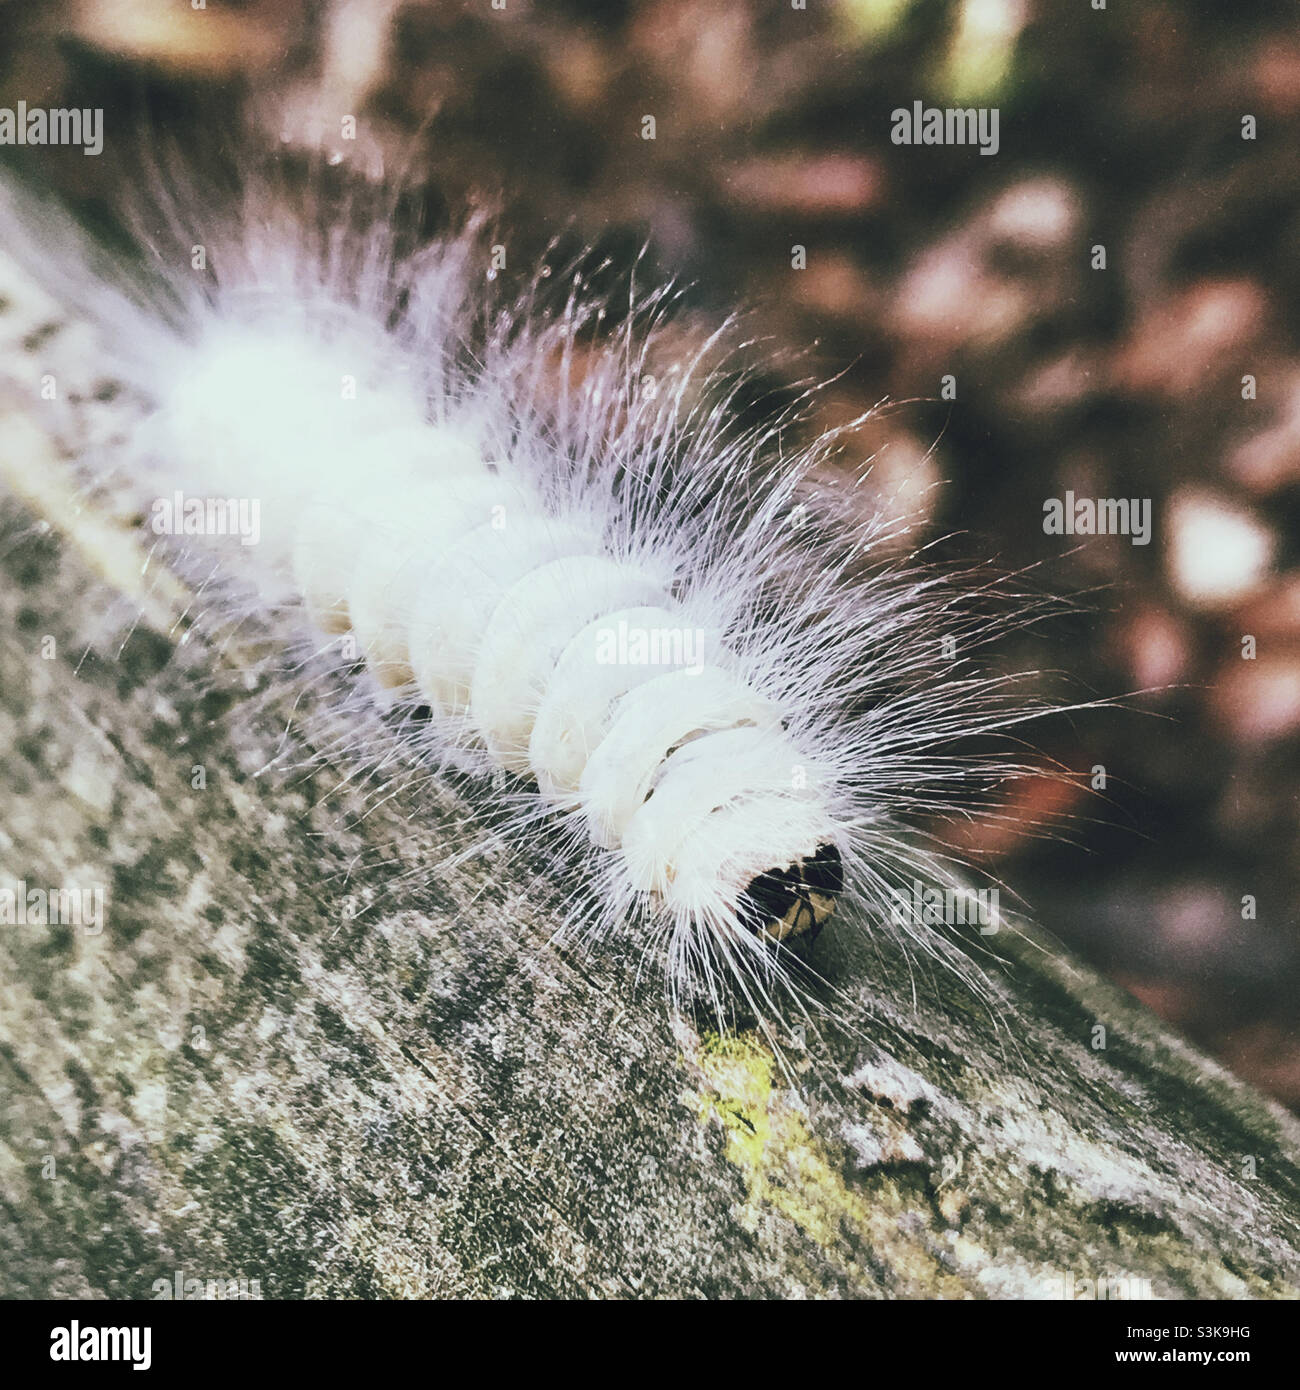 One fuzzy white caterpillar on a wooden Bench. It is called The Laugher Moth caterpillar. Stock Photo